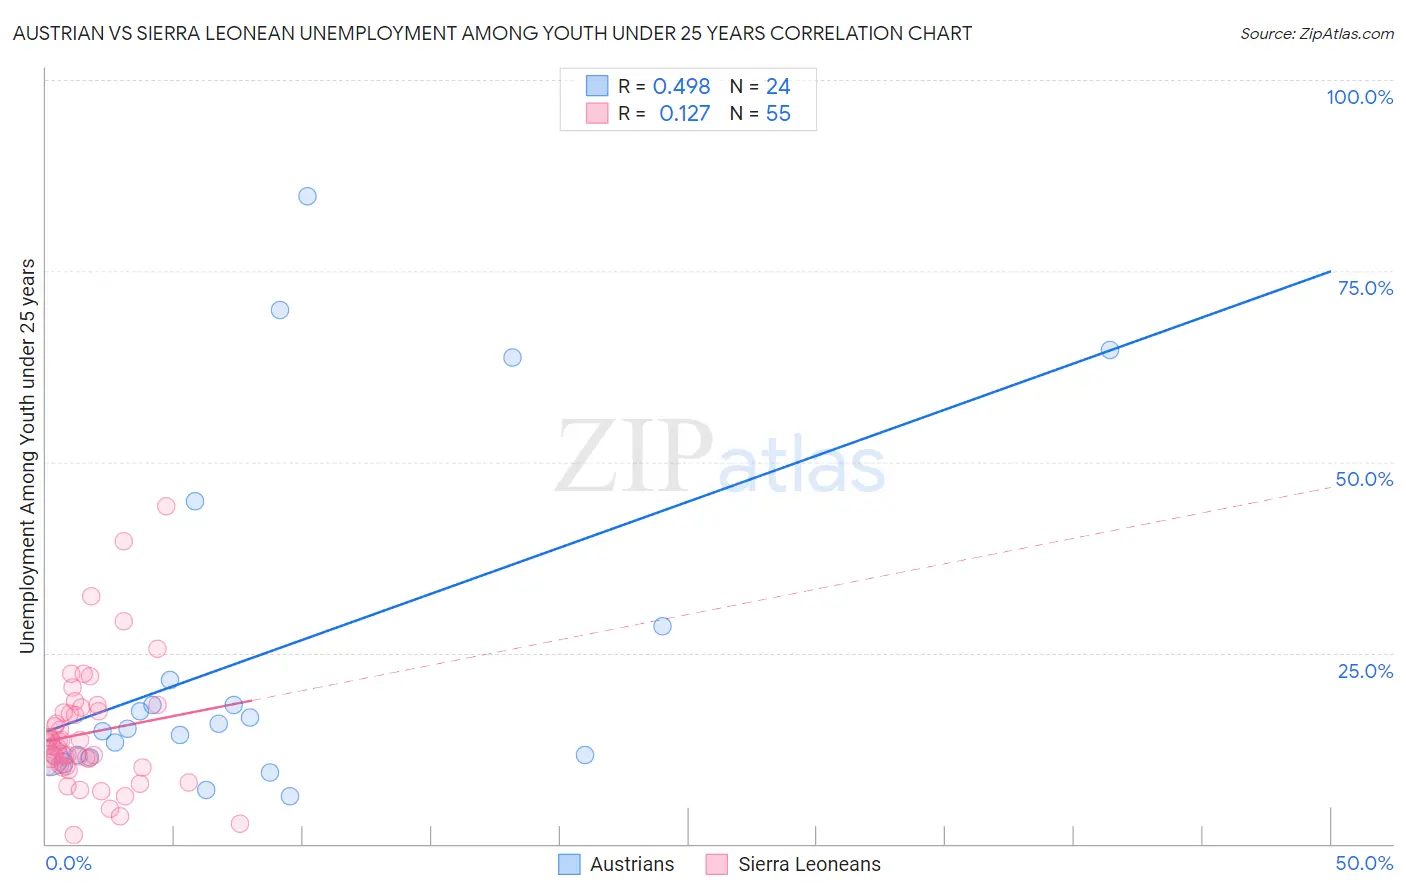 Austrian vs Sierra Leonean Unemployment Among Youth under 25 years